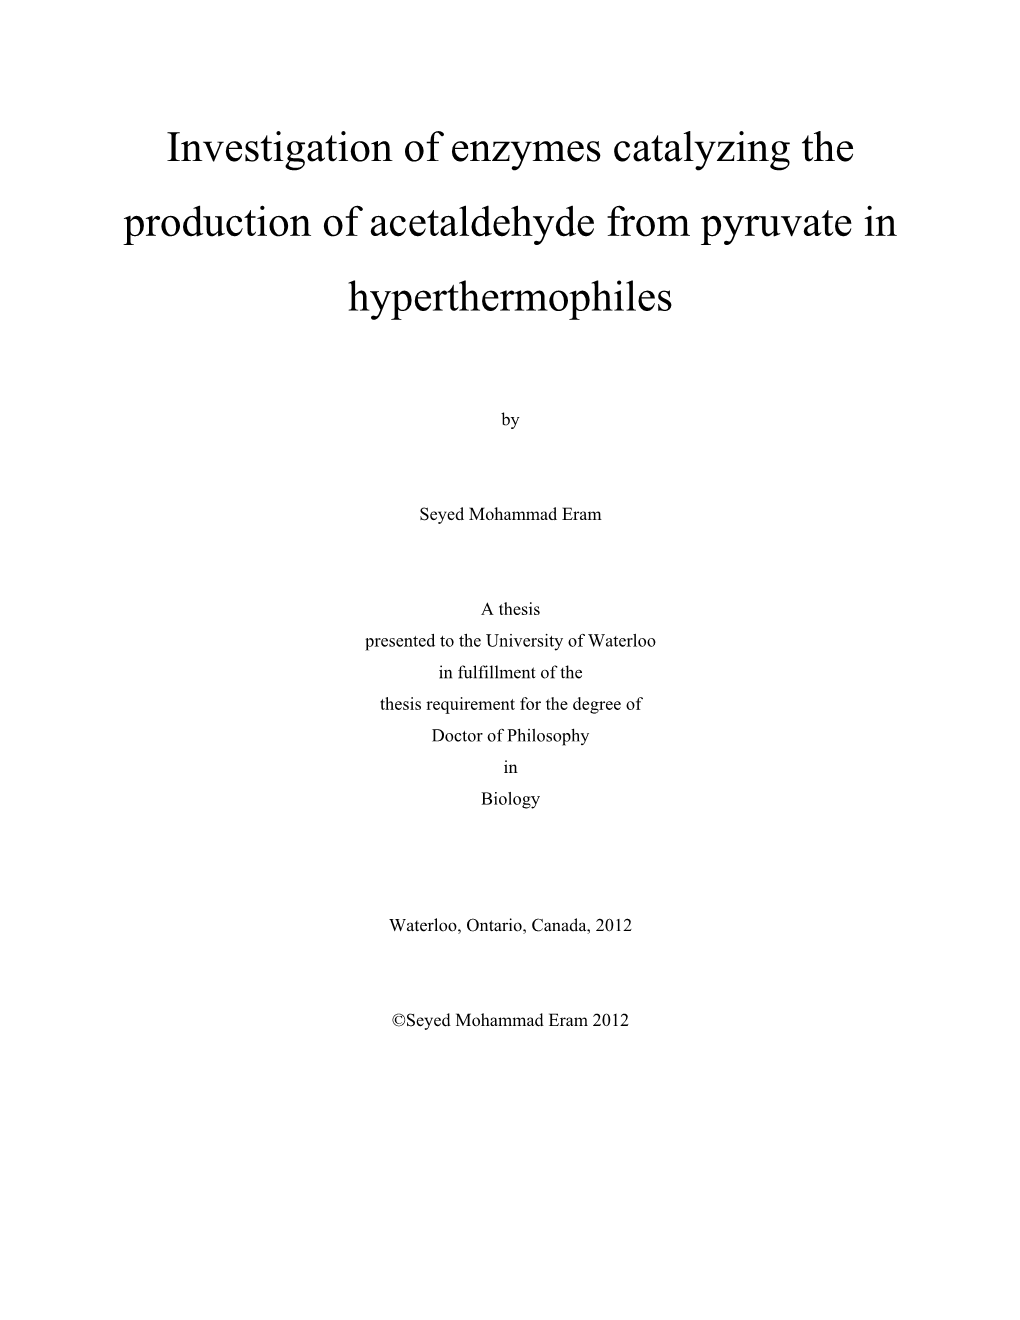 Investigation of Enzymes Catalyzing the Production of Acetaldehyde from Pyruvate In